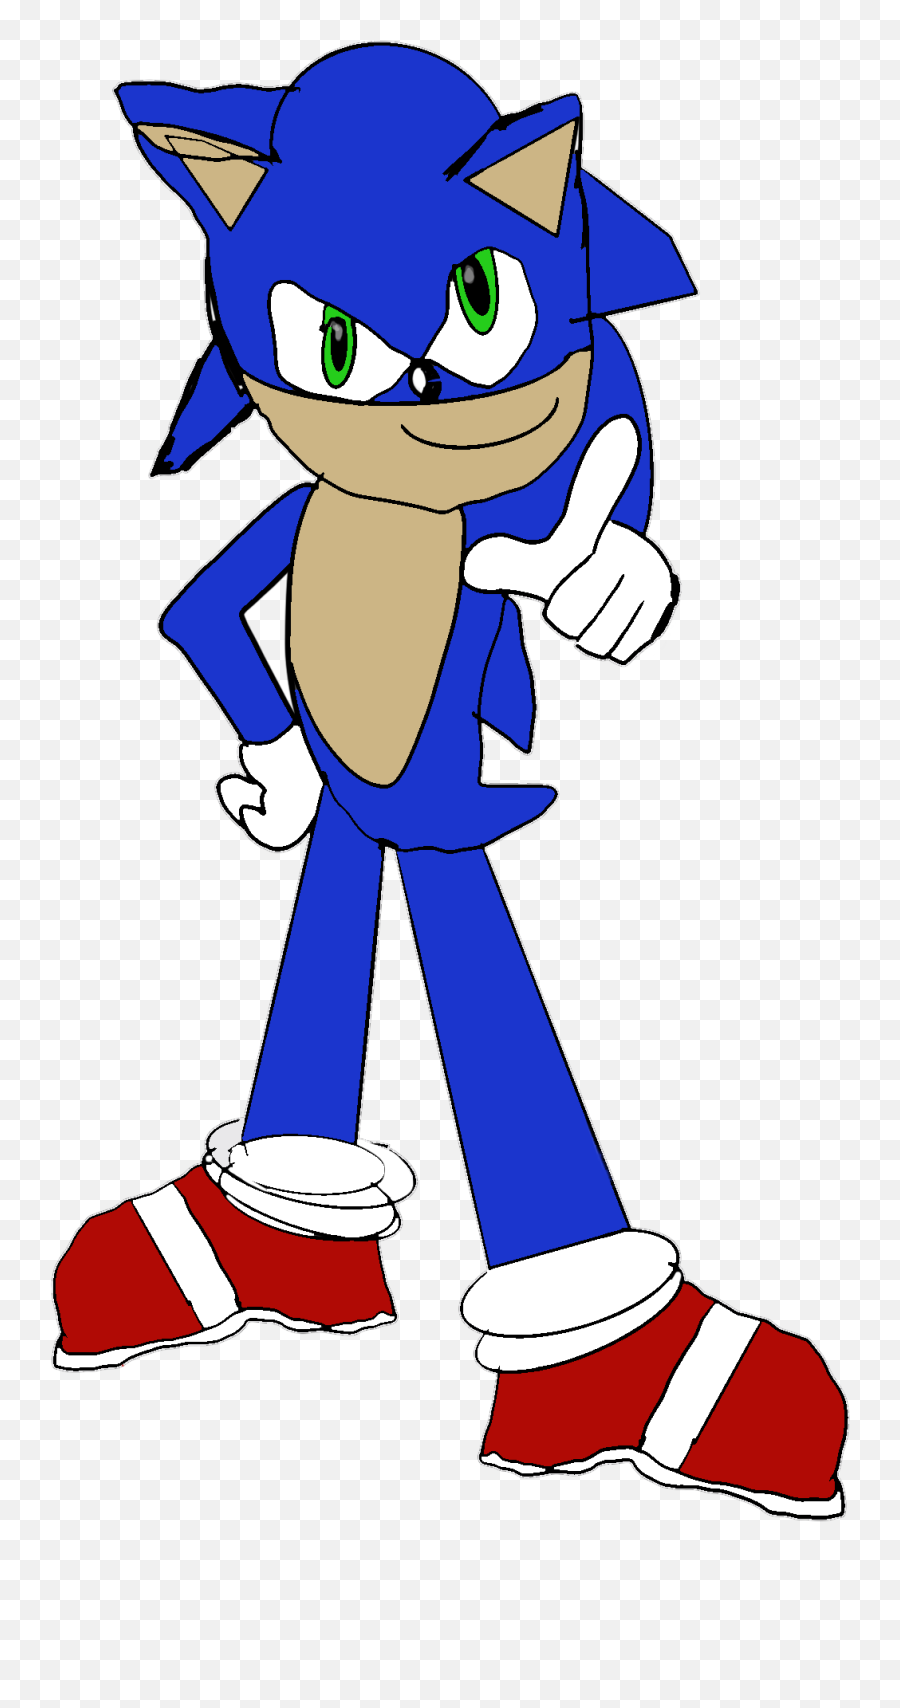 Sonic Movie Sprite For Scratch - Album On Imgur Fictional Character Png,Sonic Sprite Png